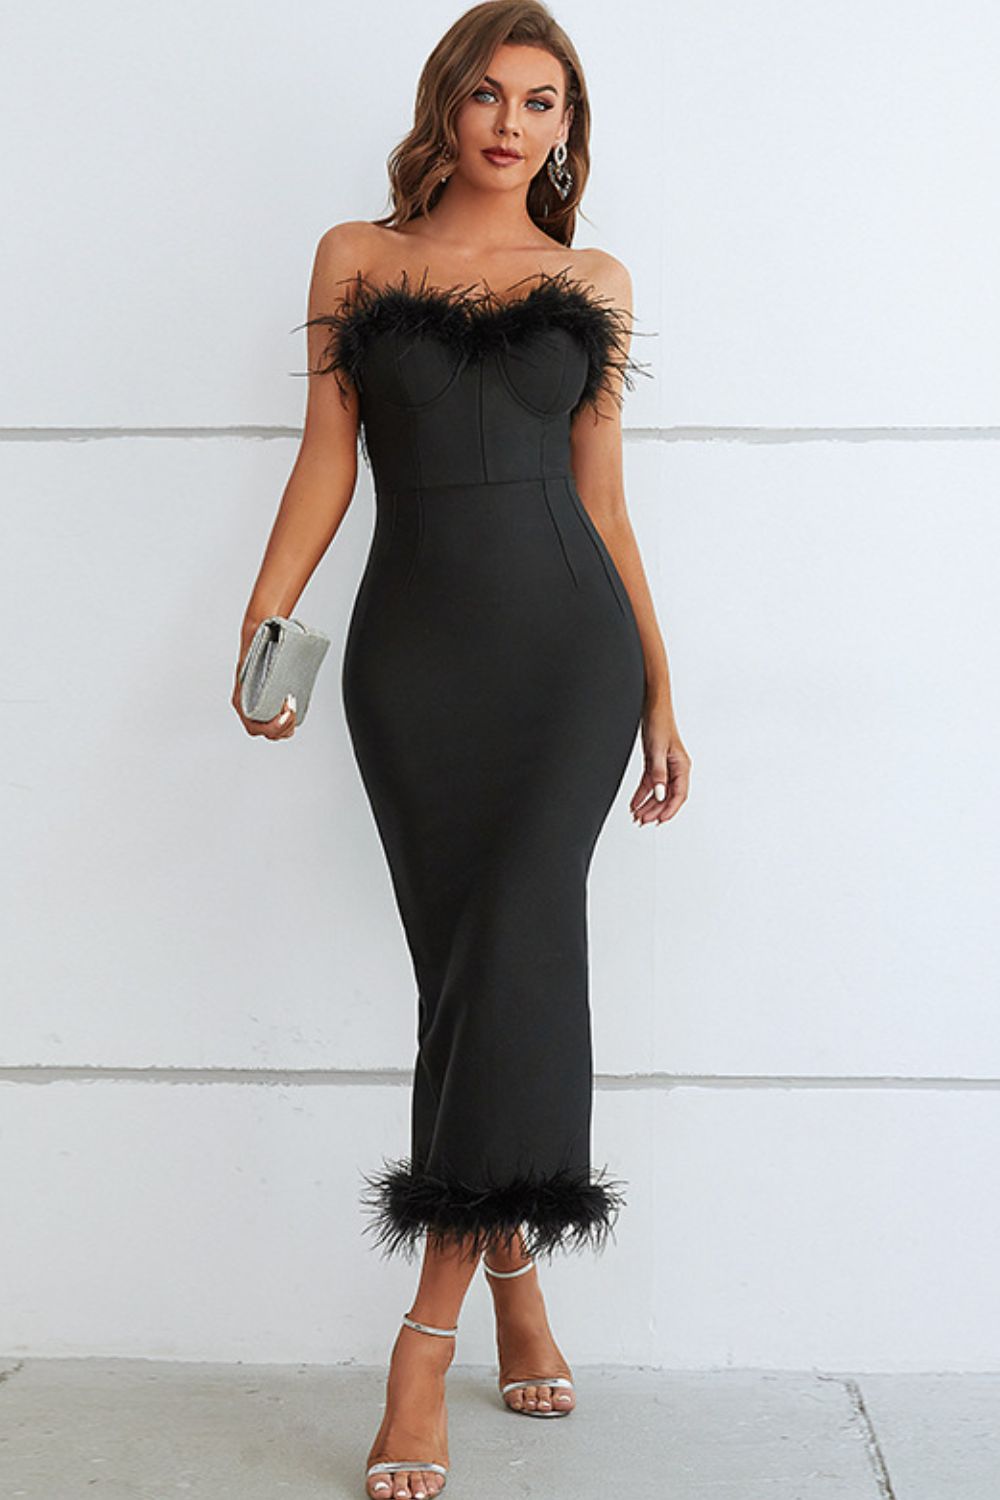 Trendsi Cupid Beauty Supplies Woman Cocktail Dresses Feather Trim Strapless Sweetheart Neck Dress